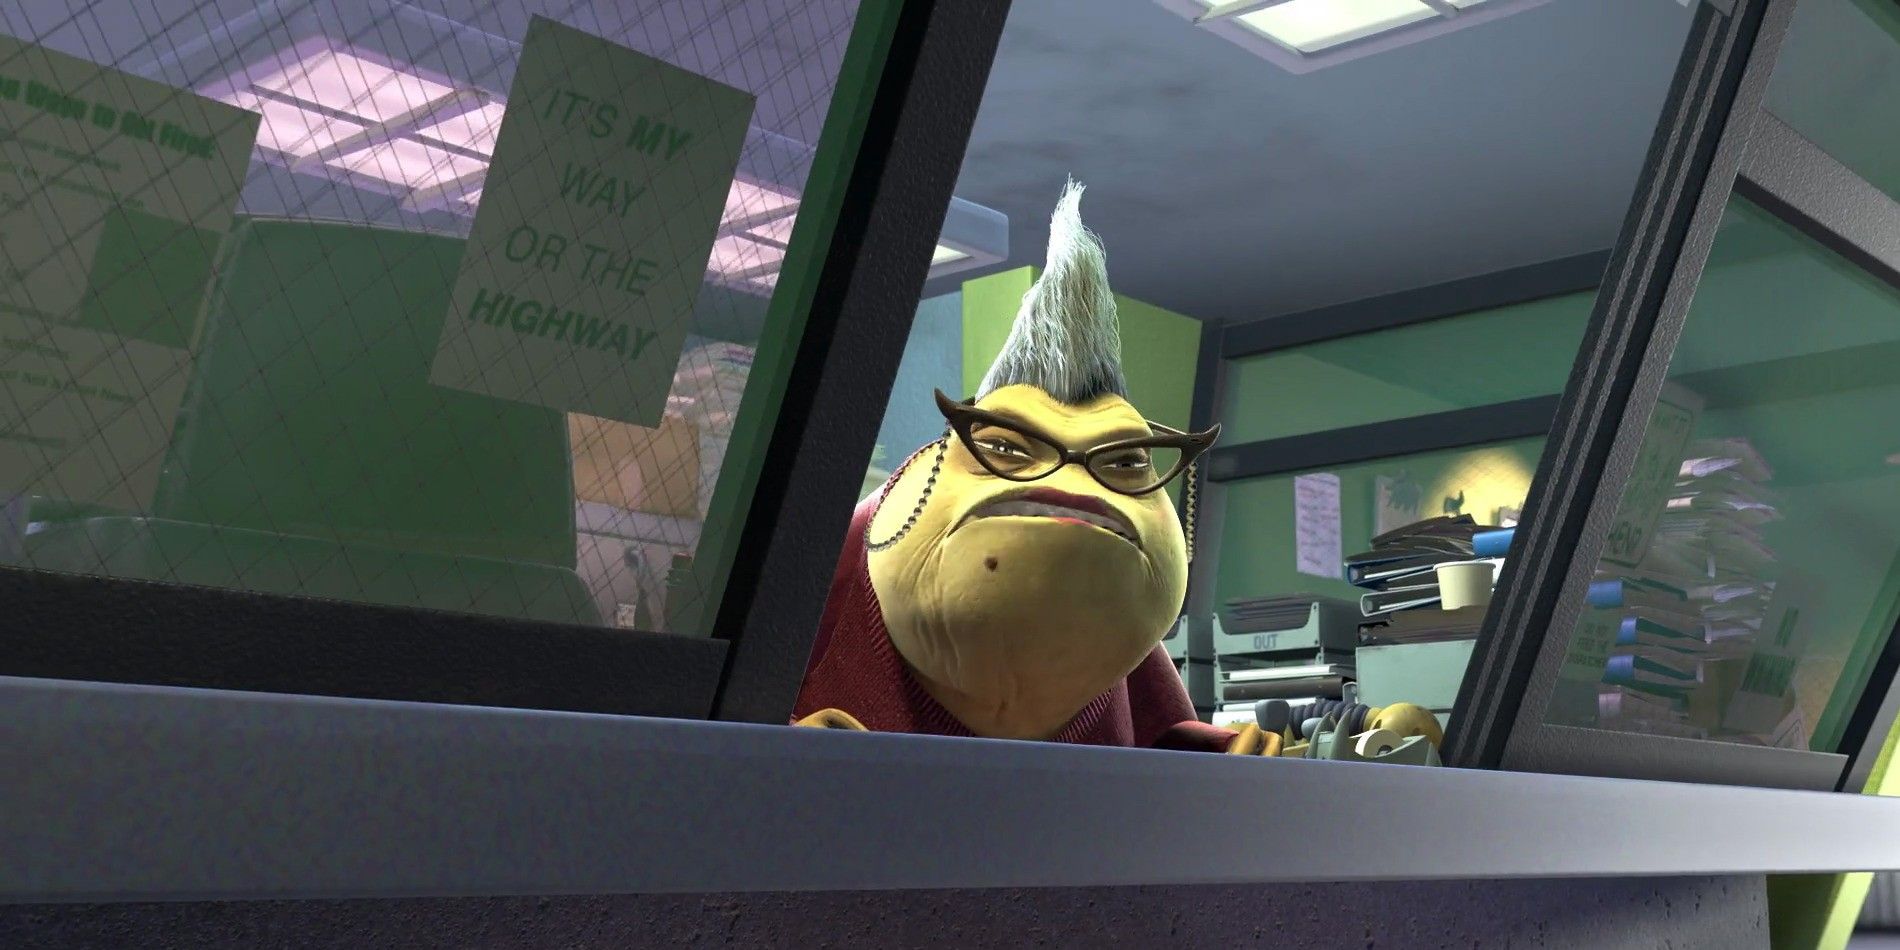 Roz gives a disgruntled look from behind her desk, while wearing her glasses